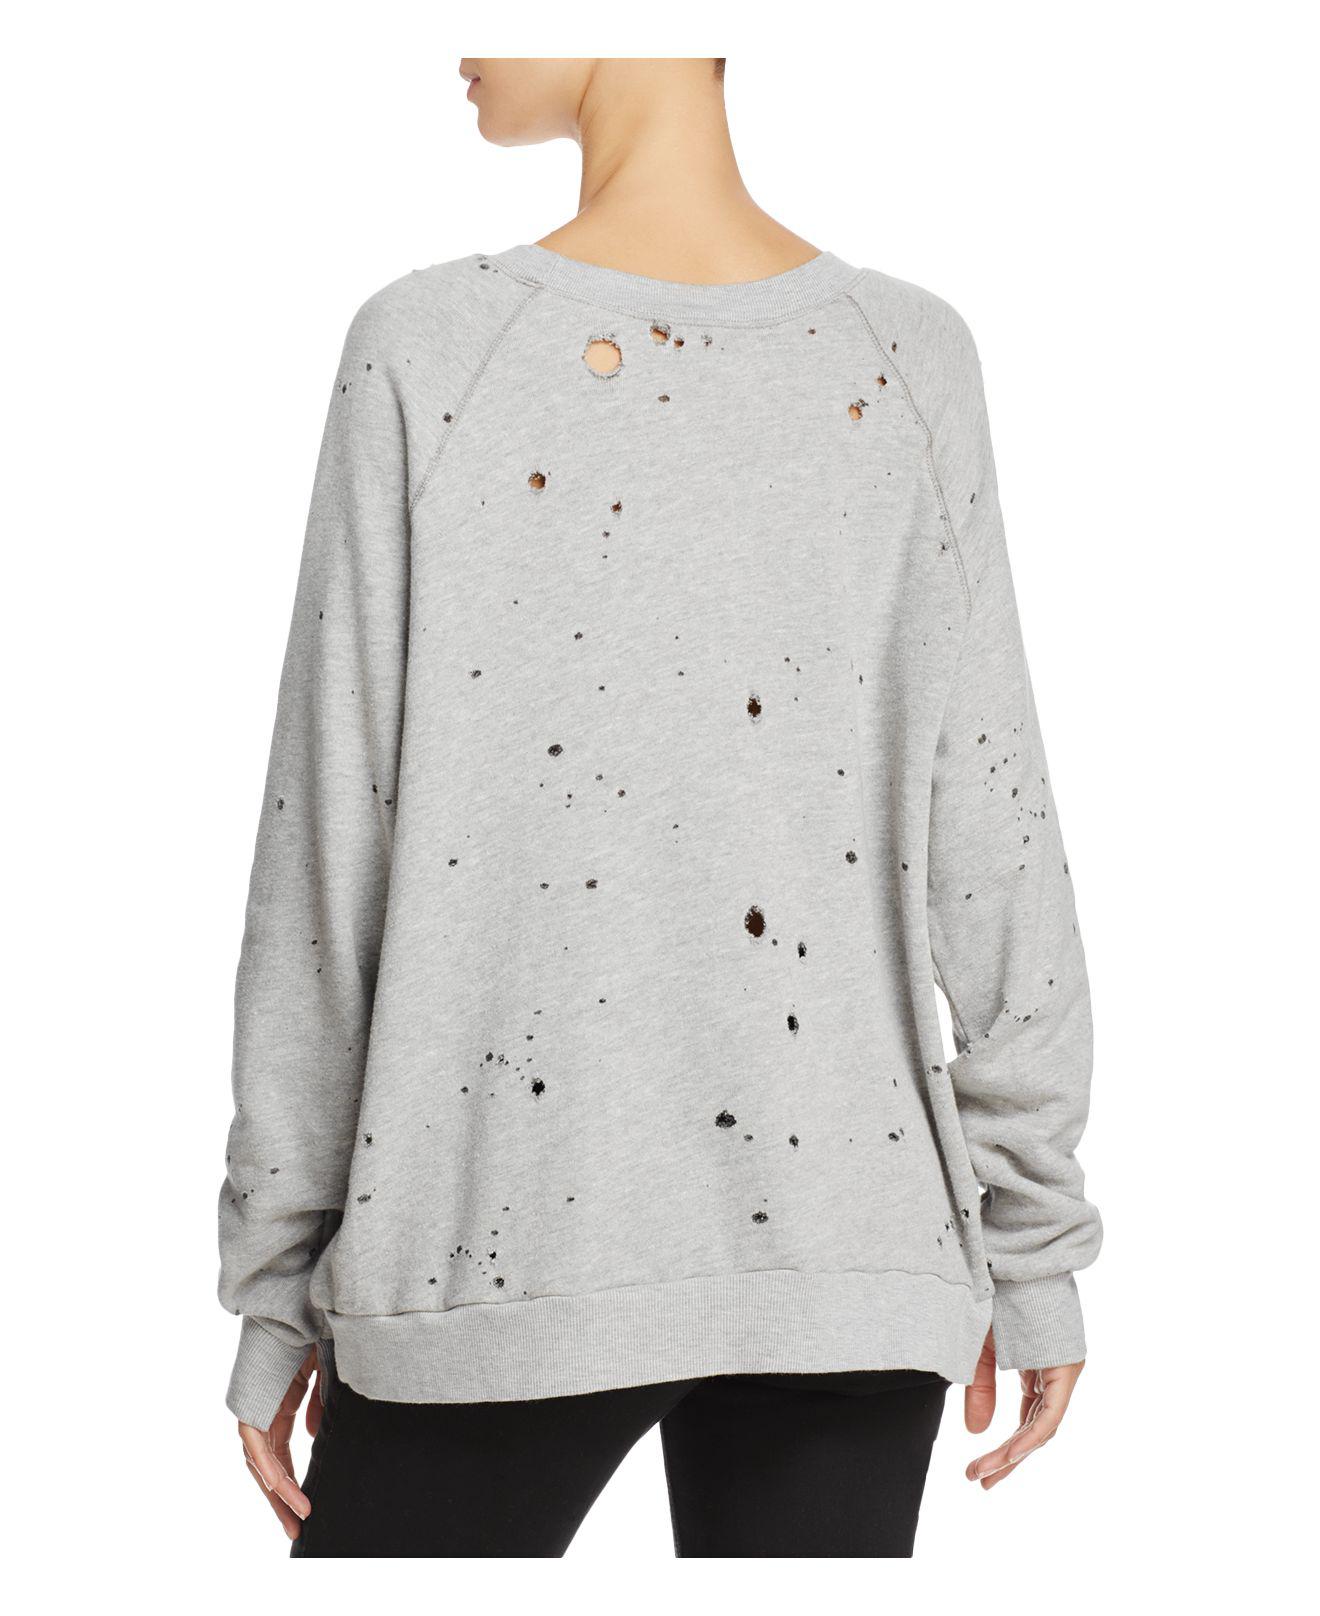 Project Social T My Generation Distressed Sweatshirt in Heather Gray ...